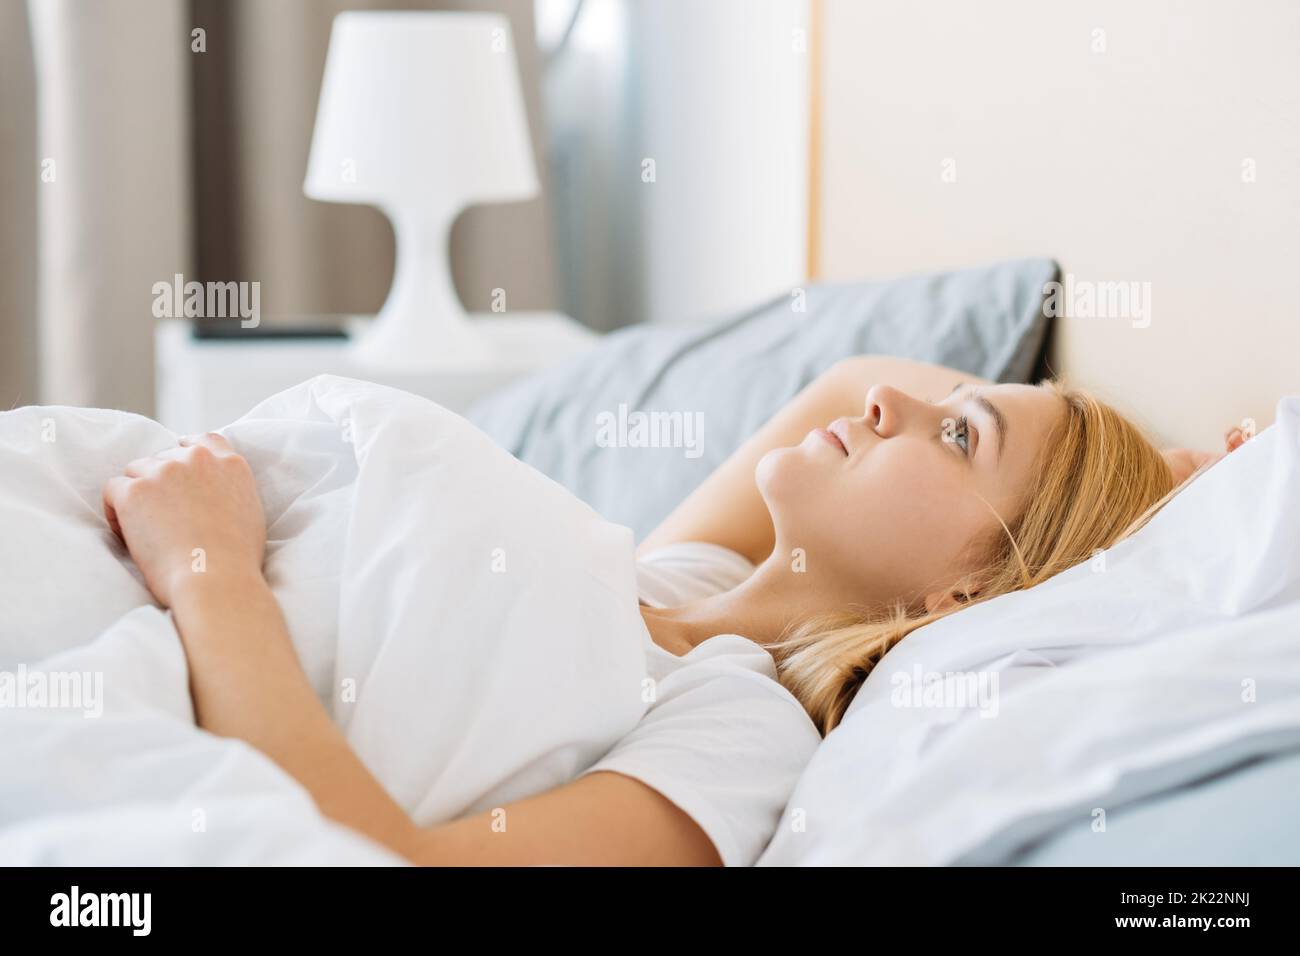 Bedroom relax. Healthy rest. New day. Slept well. Peaceful dreamy fresh awake young woman under blanket in soft clean white cozy bed sheet enjoying go Stock Photo